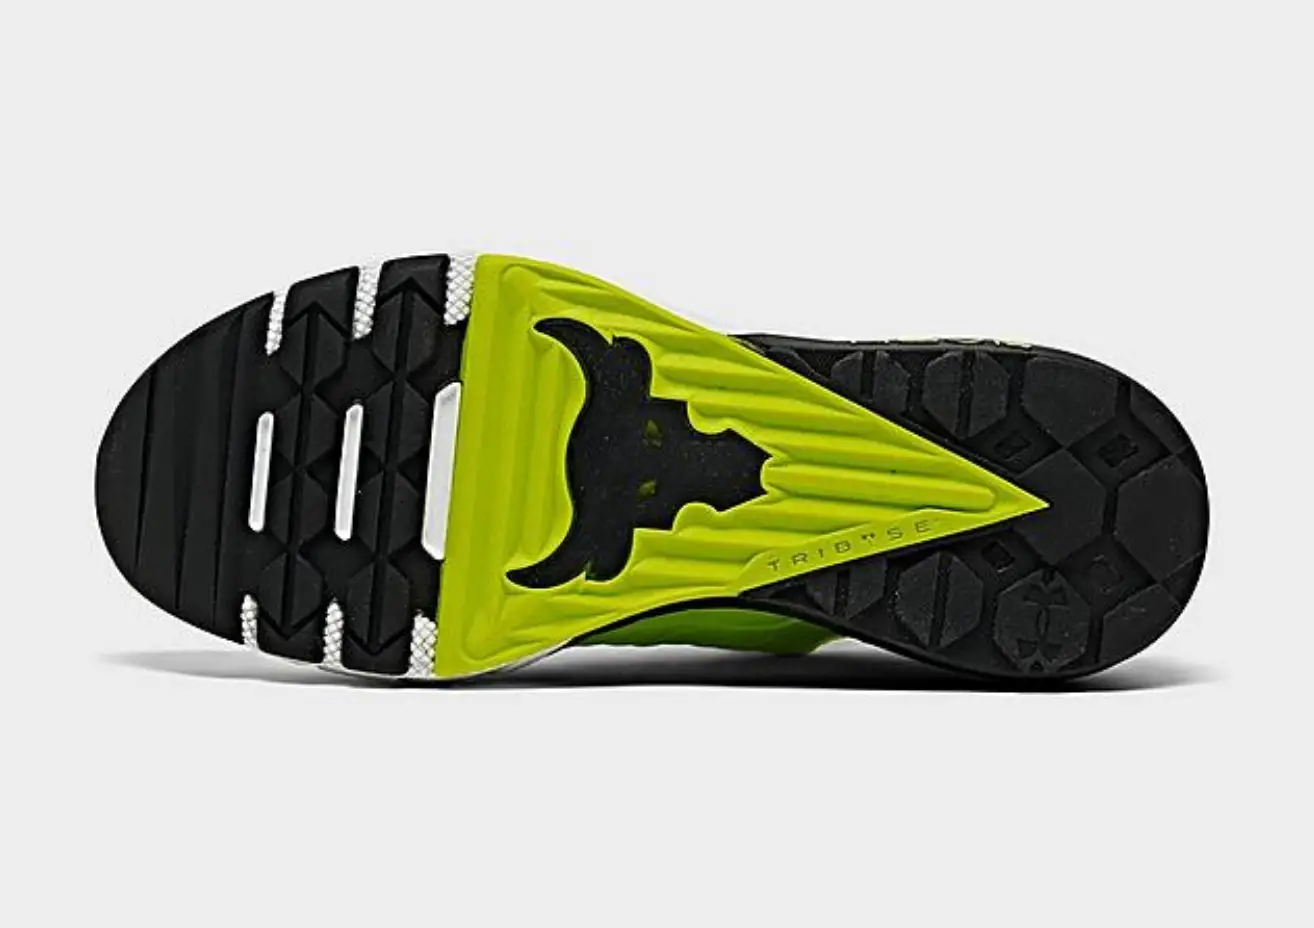 Under Armour Project Rock 3